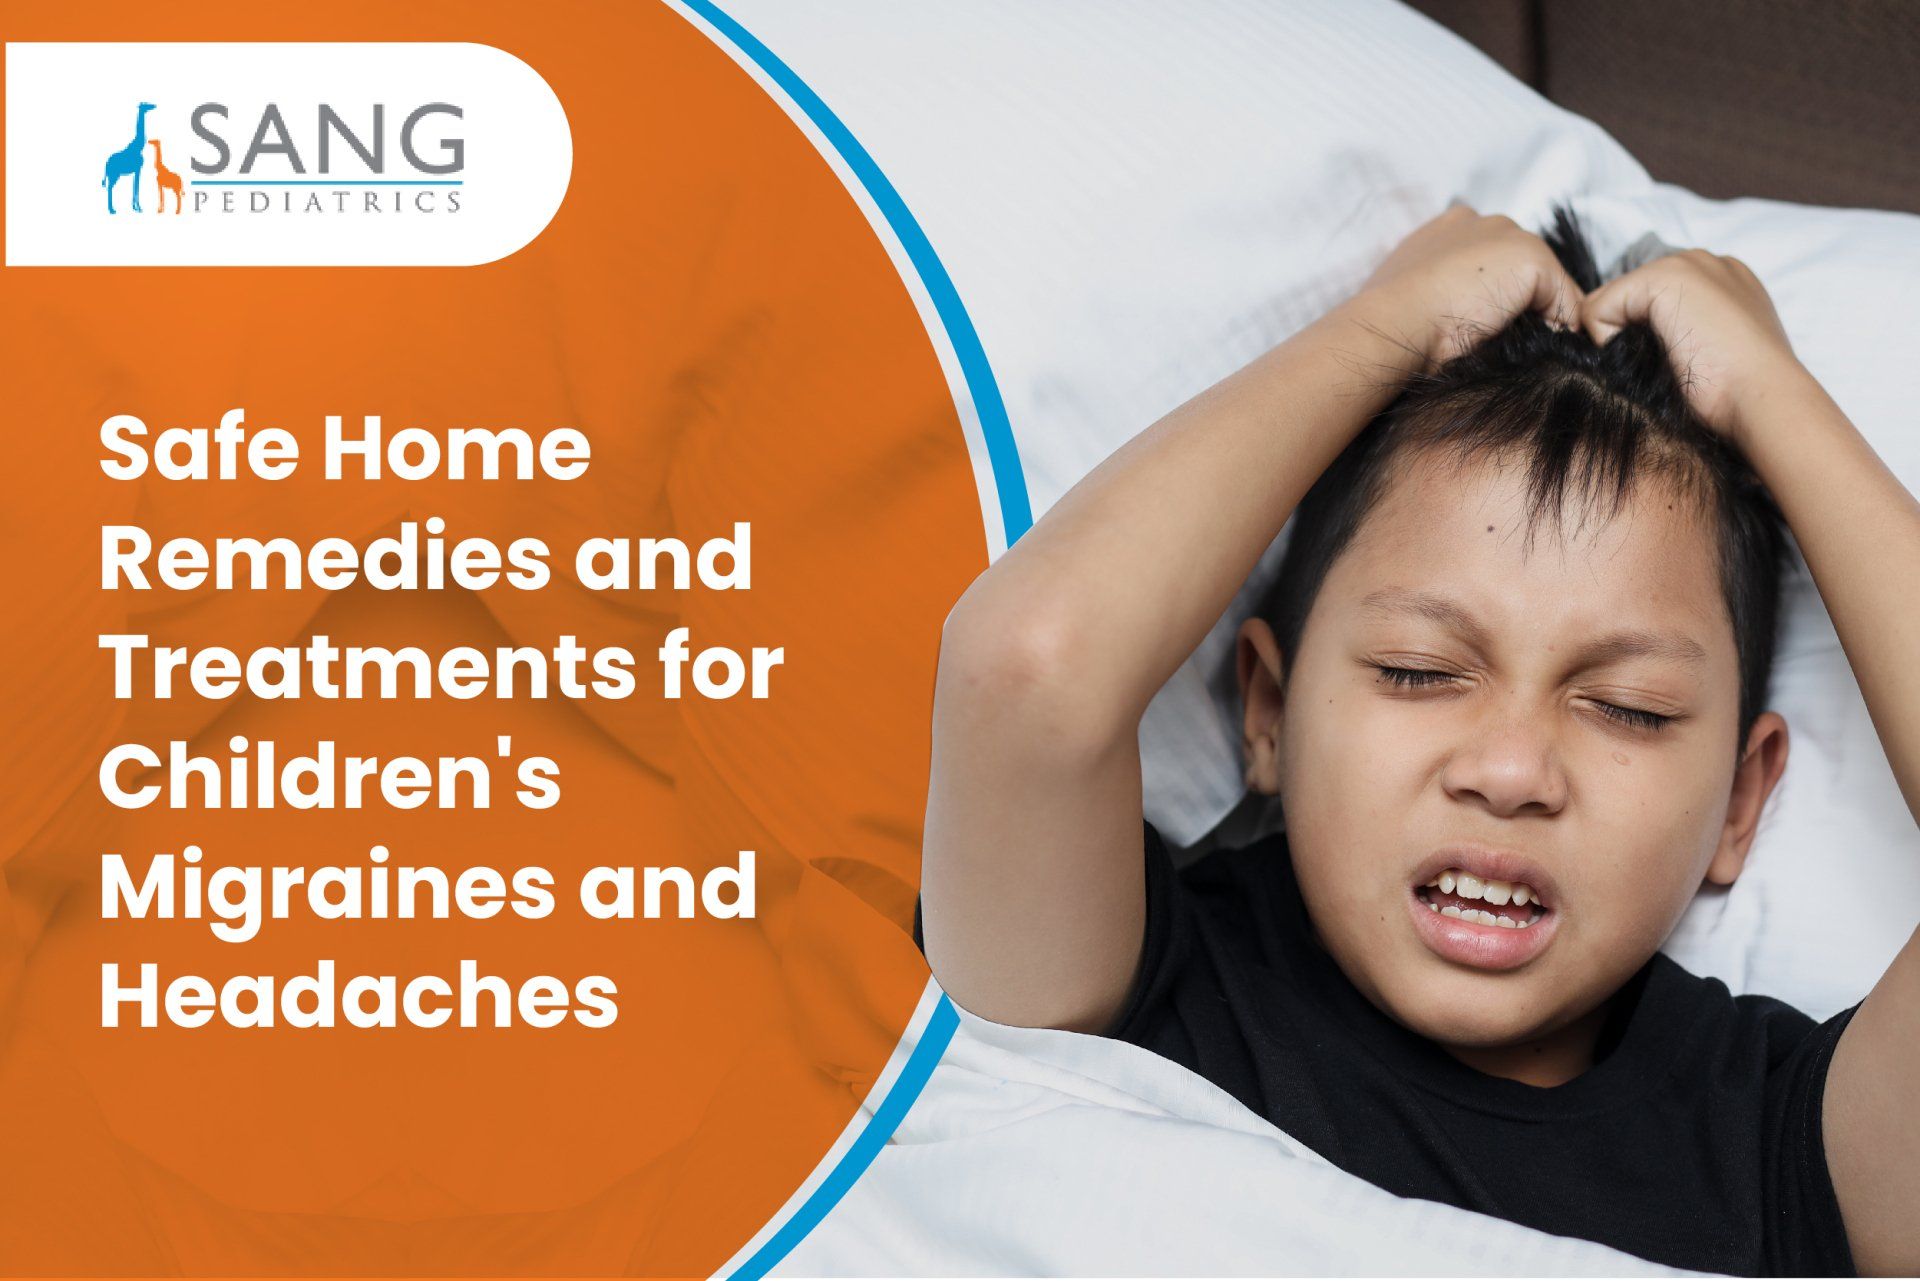 Safe Home Remedies and Treatments for Children's Migraines and Headaches